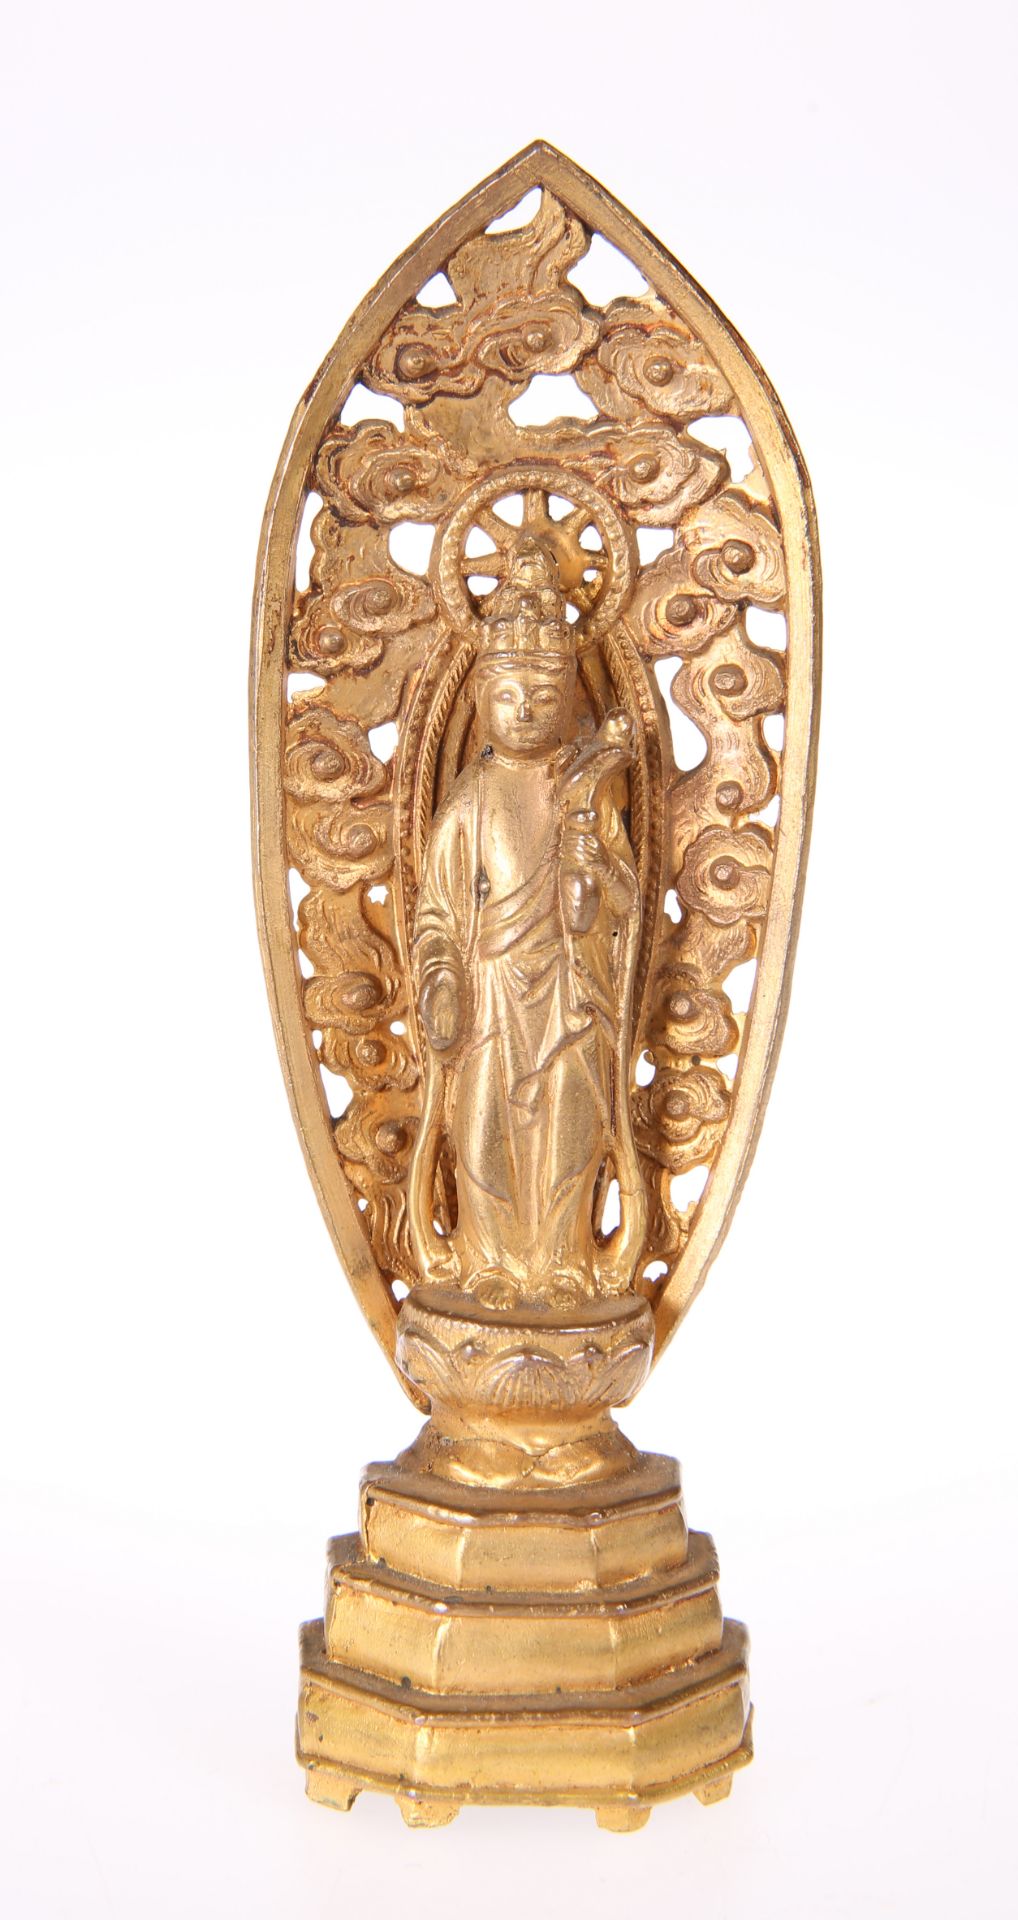 A CHINESE GILT-BRONZE FIGURE OF BUDDHA, 19TH CENTURY, modelled standing on a lotus plinth and